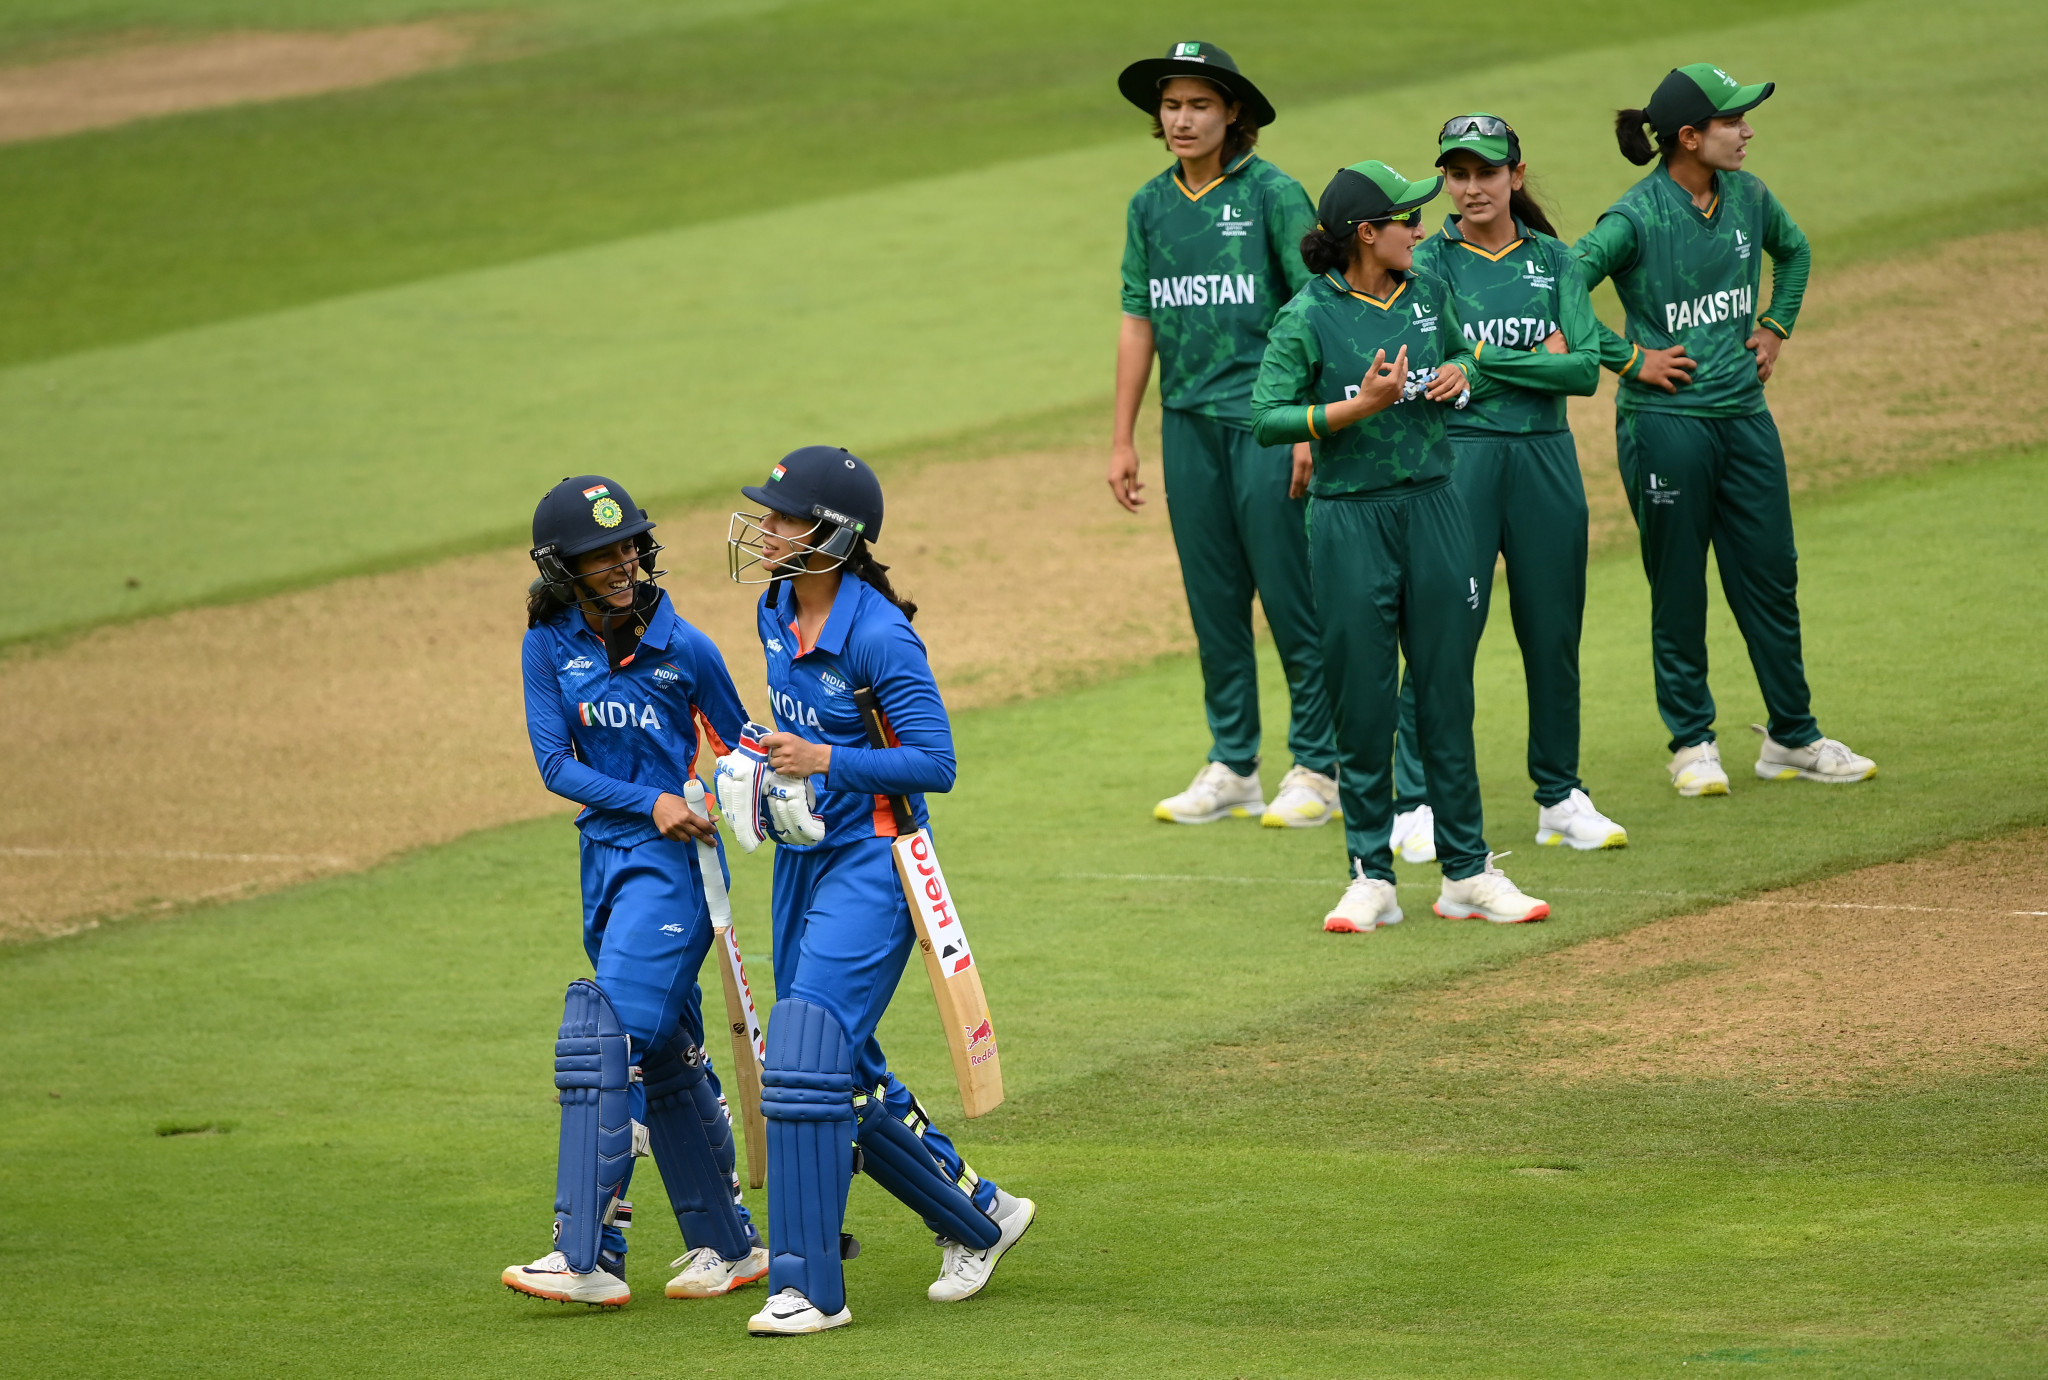 India brush past Pakistan for first cricket win at Birmingham 2022 and Australia reach semi-finals